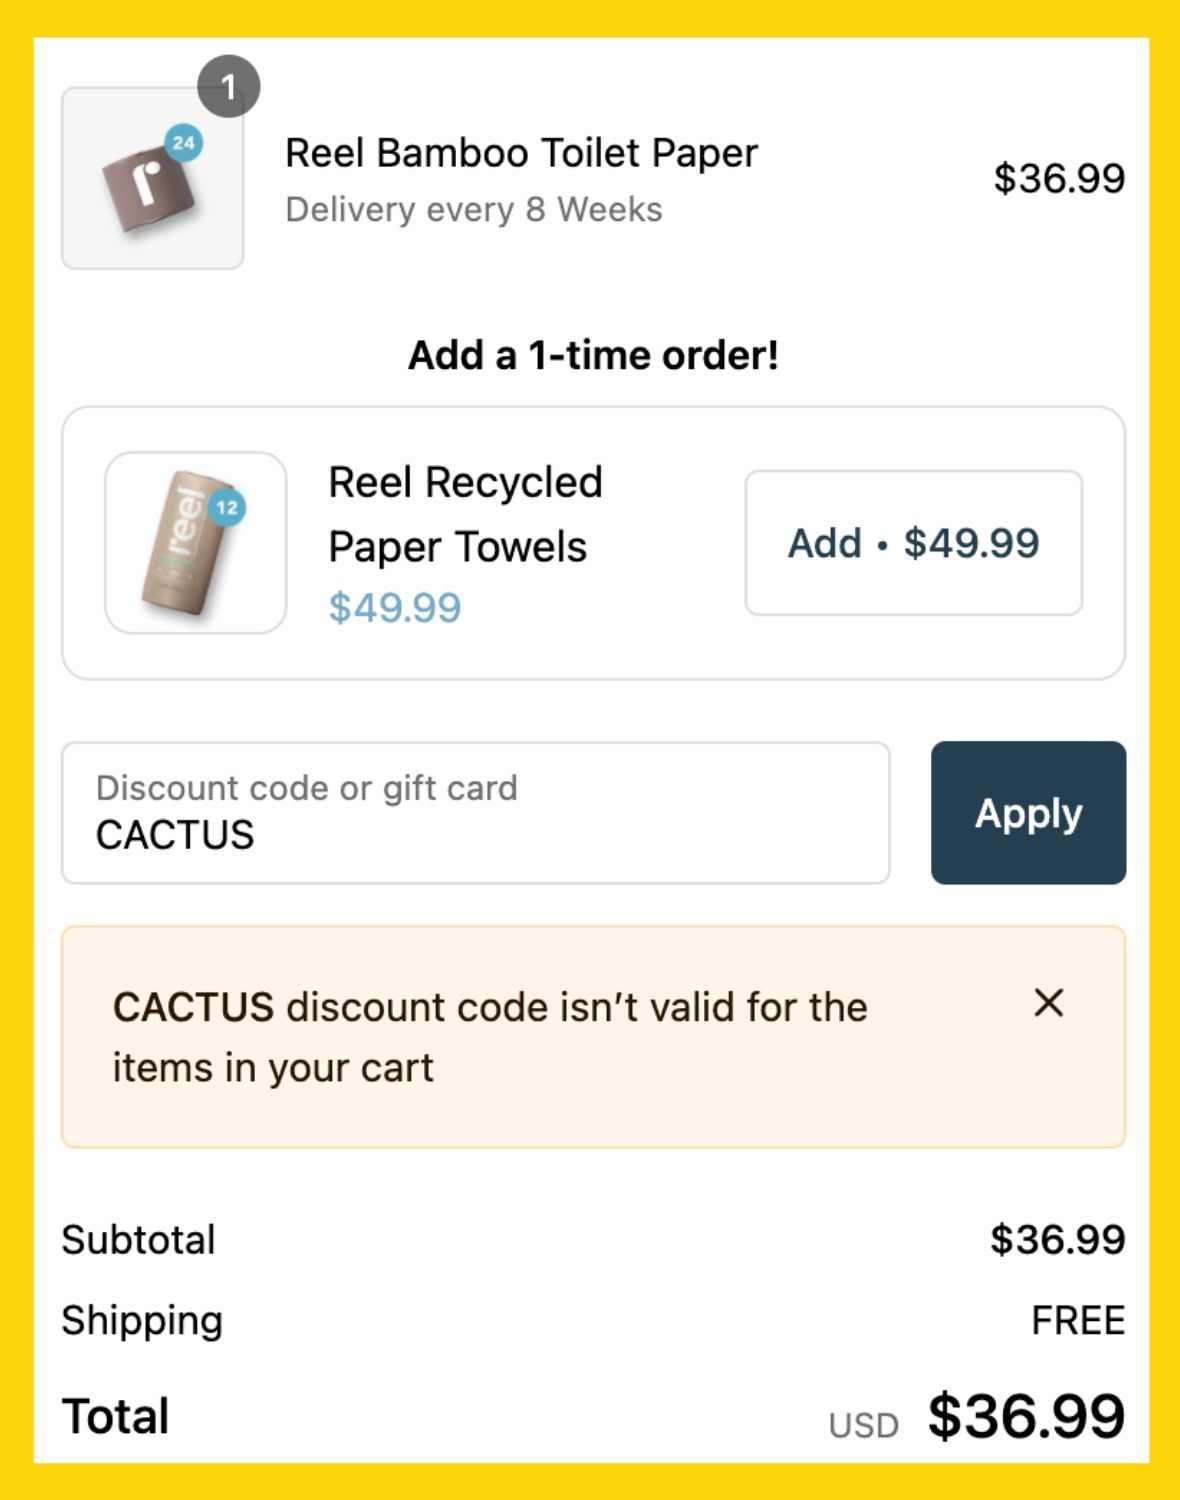 Save 25% on Reel Bamboo Toilet Paper or Paper Towels - The Krazy